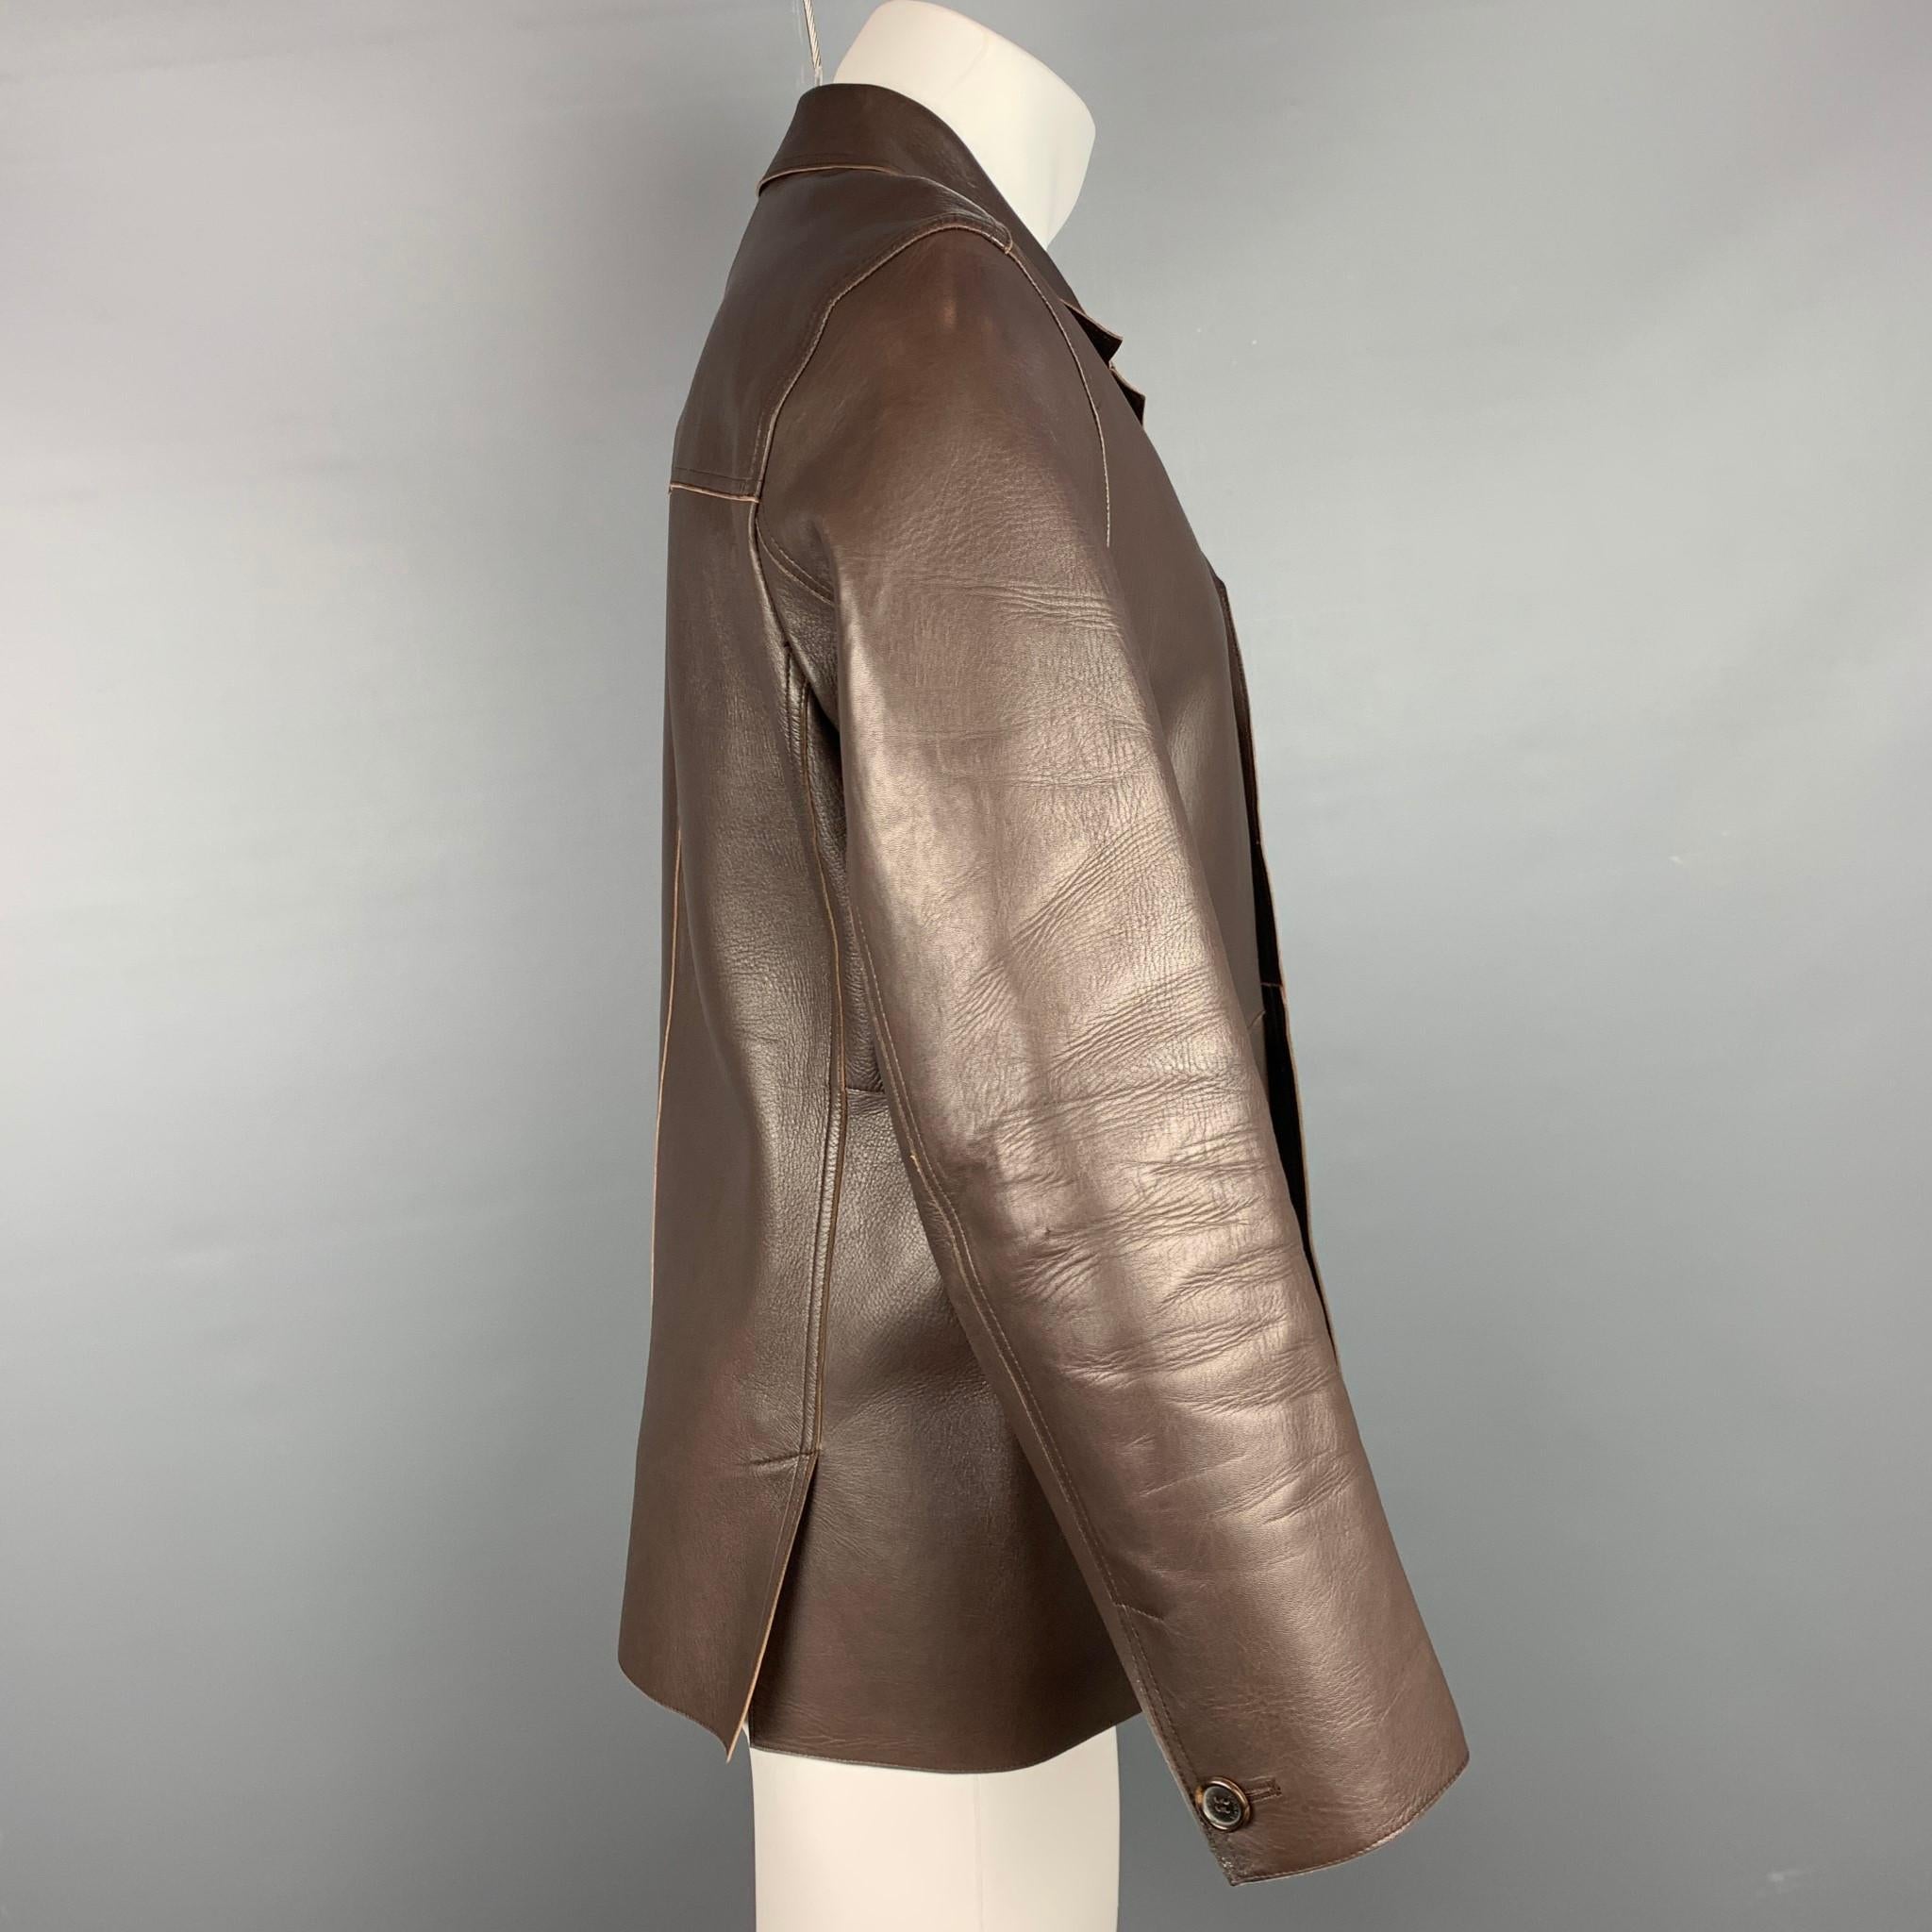 PRADA jacket comes in a brown leather with no liner featuring a notch lapel, slit pockets, and a buttoned closure. Made in Italy.

Very Good Pre-Owned Condition.
Marked: 50

Measurements:

Shoulder: 18 in.
Chest: 42 in.
Sleeve: 24 in.
Length: 28.5